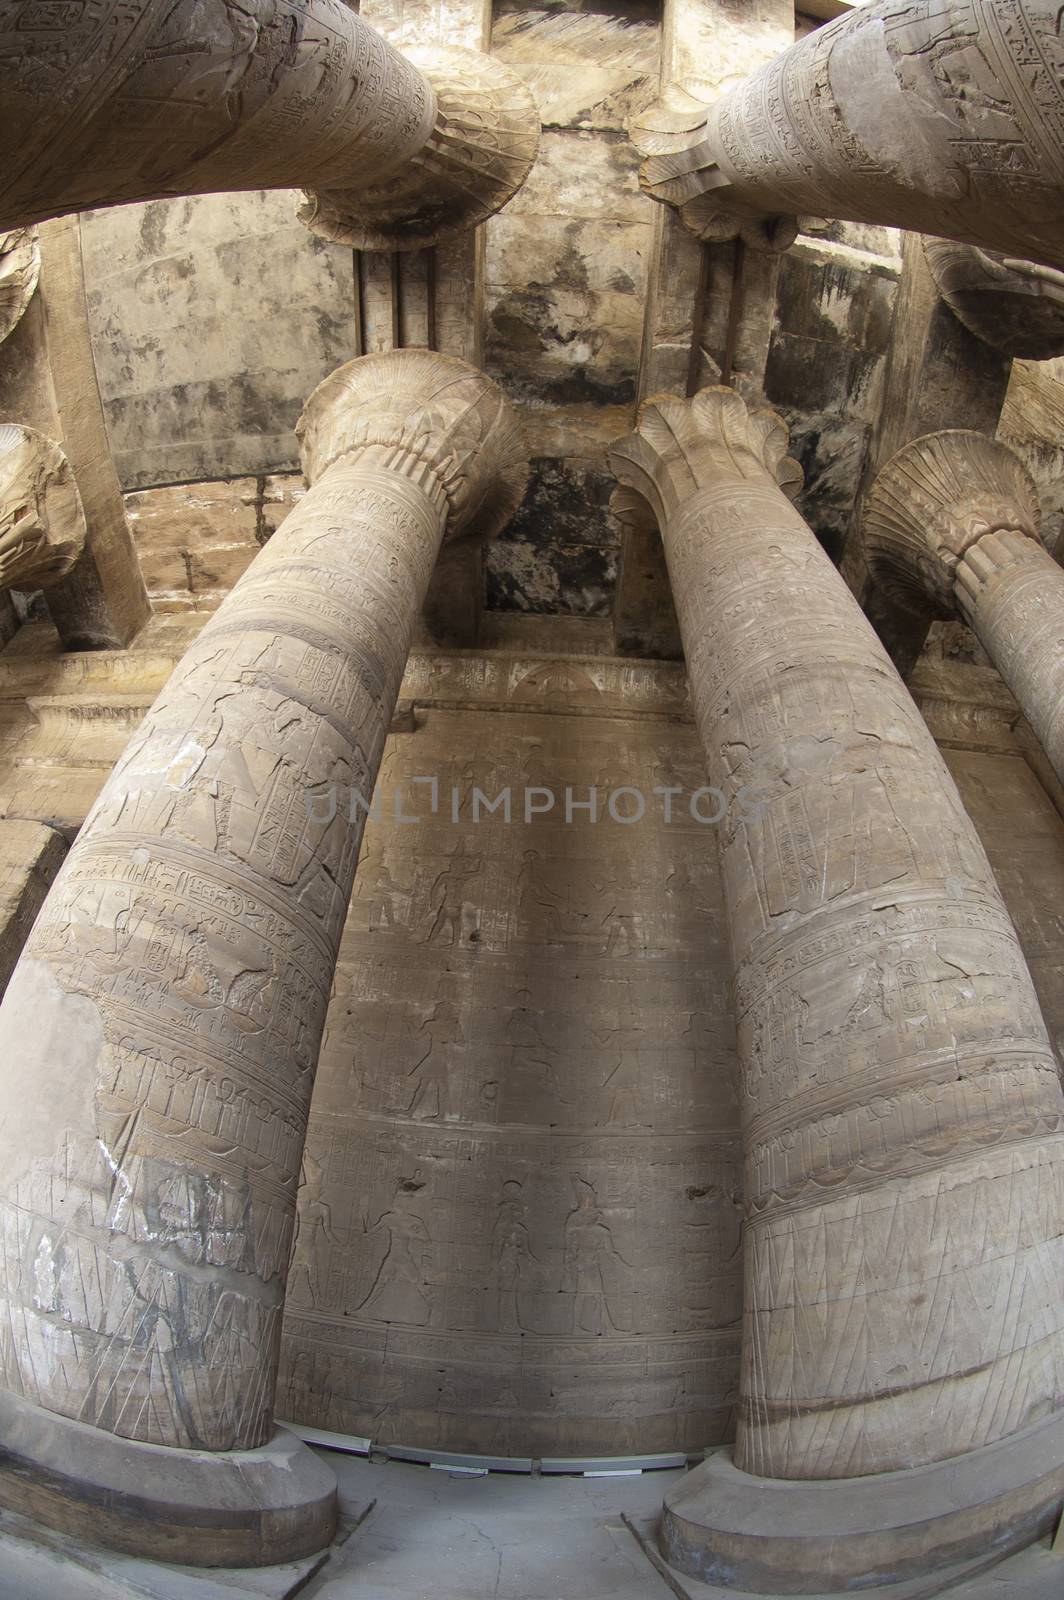 Fisheye view of columns in the main hall at Edfu Temple in Egypt with hieroglyphic carvings